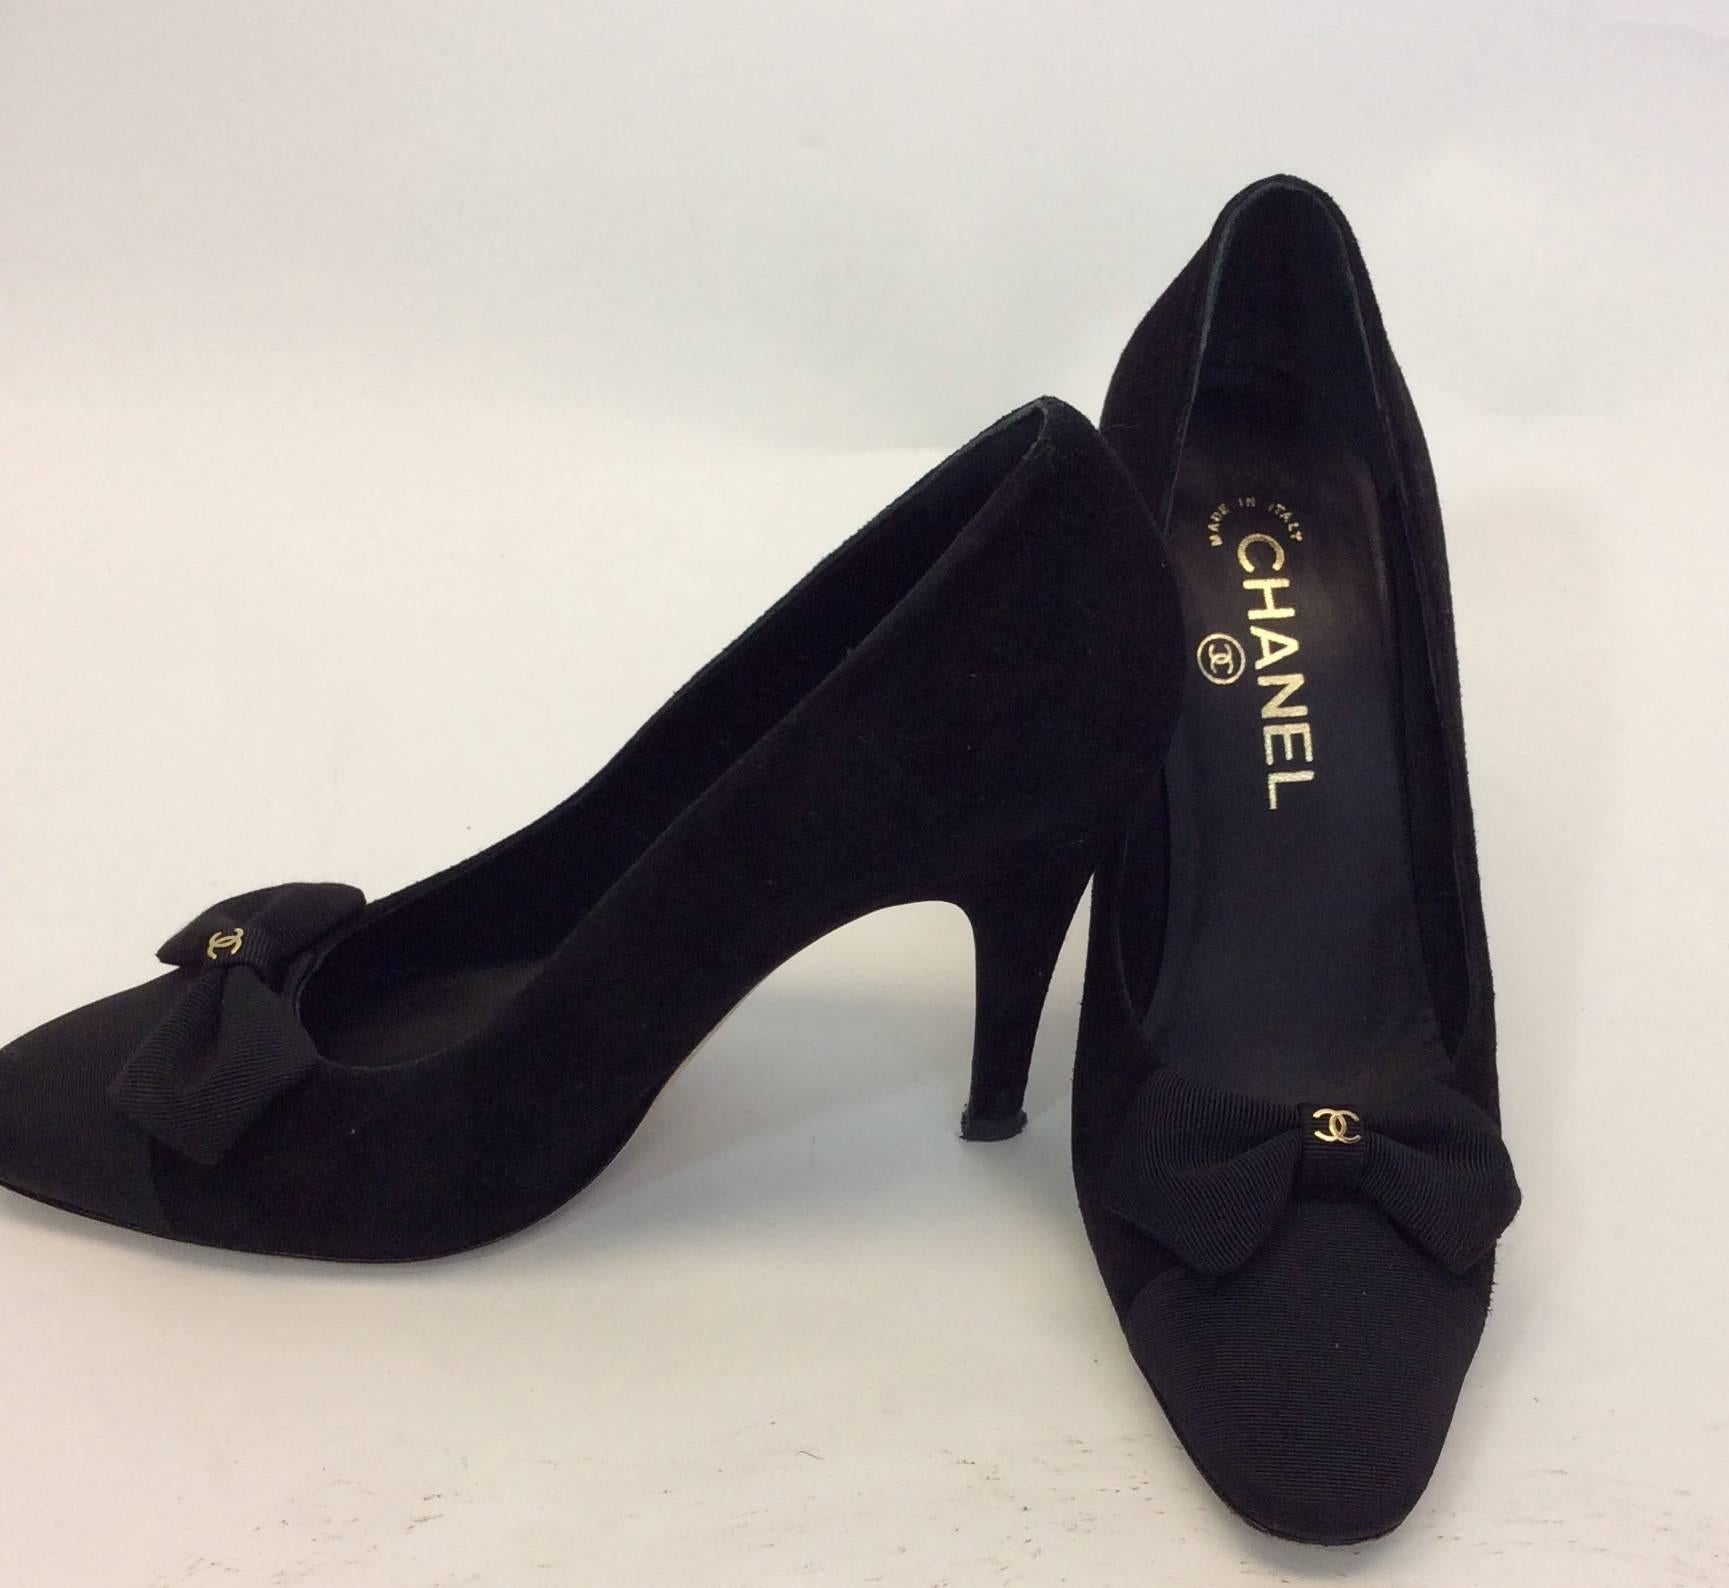 Chanel Black Suede Pump with Bow Detail In New Condition For Sale In Narberth, PA